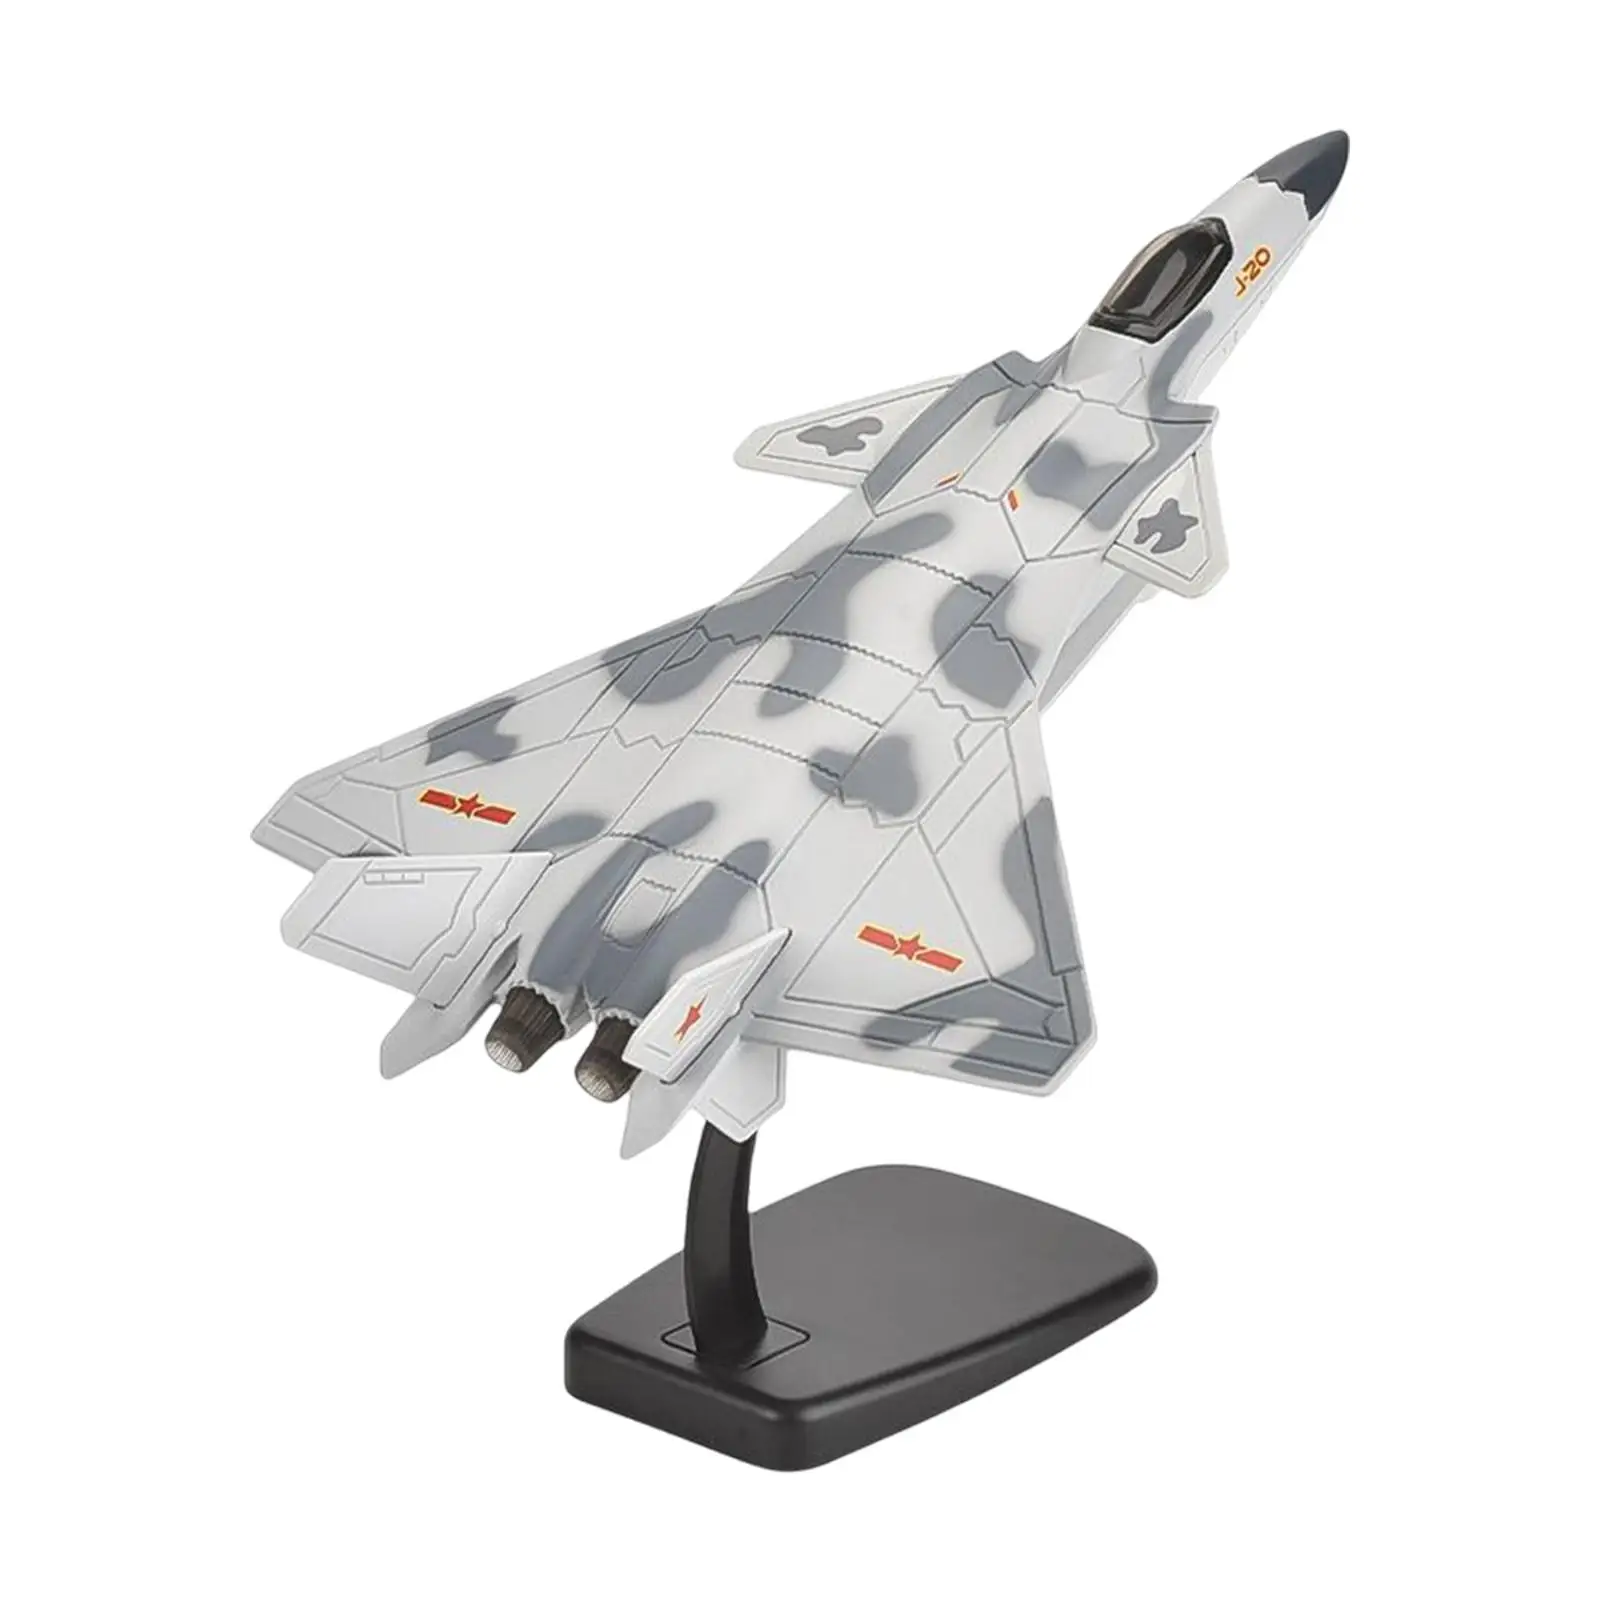 1:144 Fighter Plane Model Plane Toy Aircraft for Office Decoration Ornament